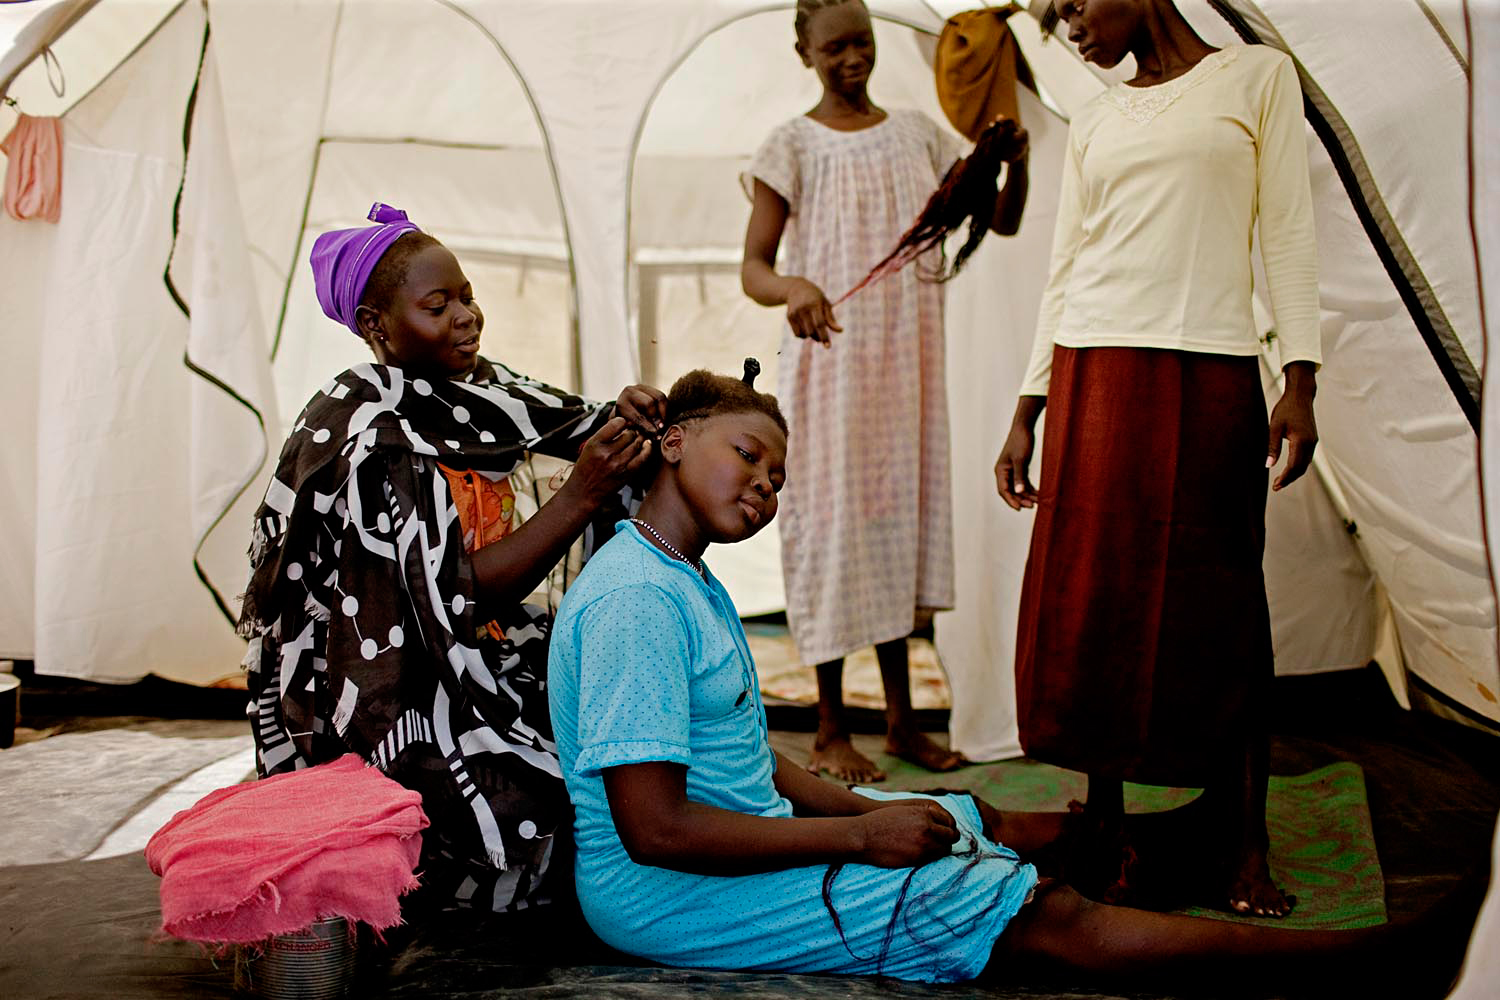 Nuban girls braid each other's hair inside their tent in the Paryang refugee camp.